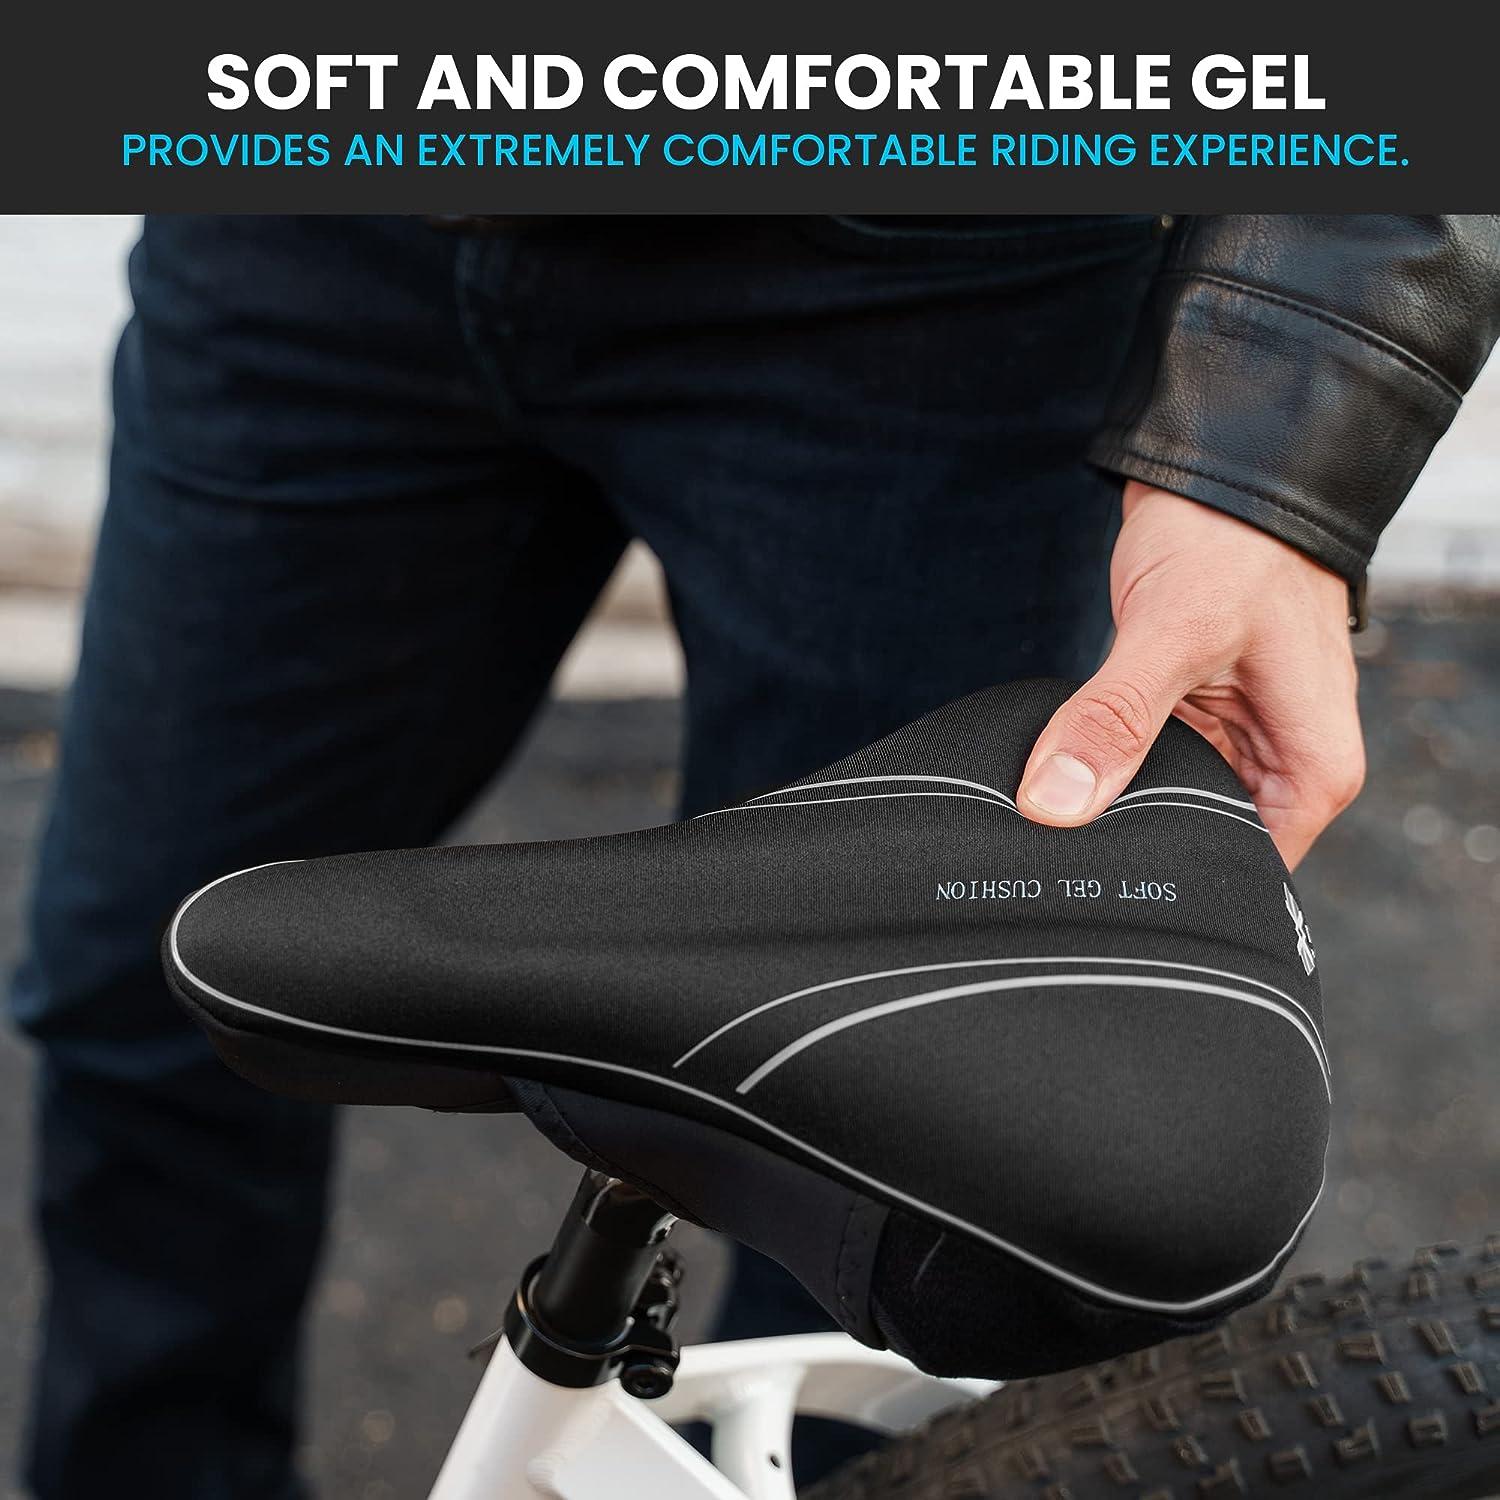 X WING Bike Seat Cushion Gel Bike Seat Cover, Gel Padded Bike Seat Cover  for Men Women Comfort, Stationary Bike Seat Cushions, Exercise Bike Seat  Cover, Bicycle Seat Cushion for Indoor 